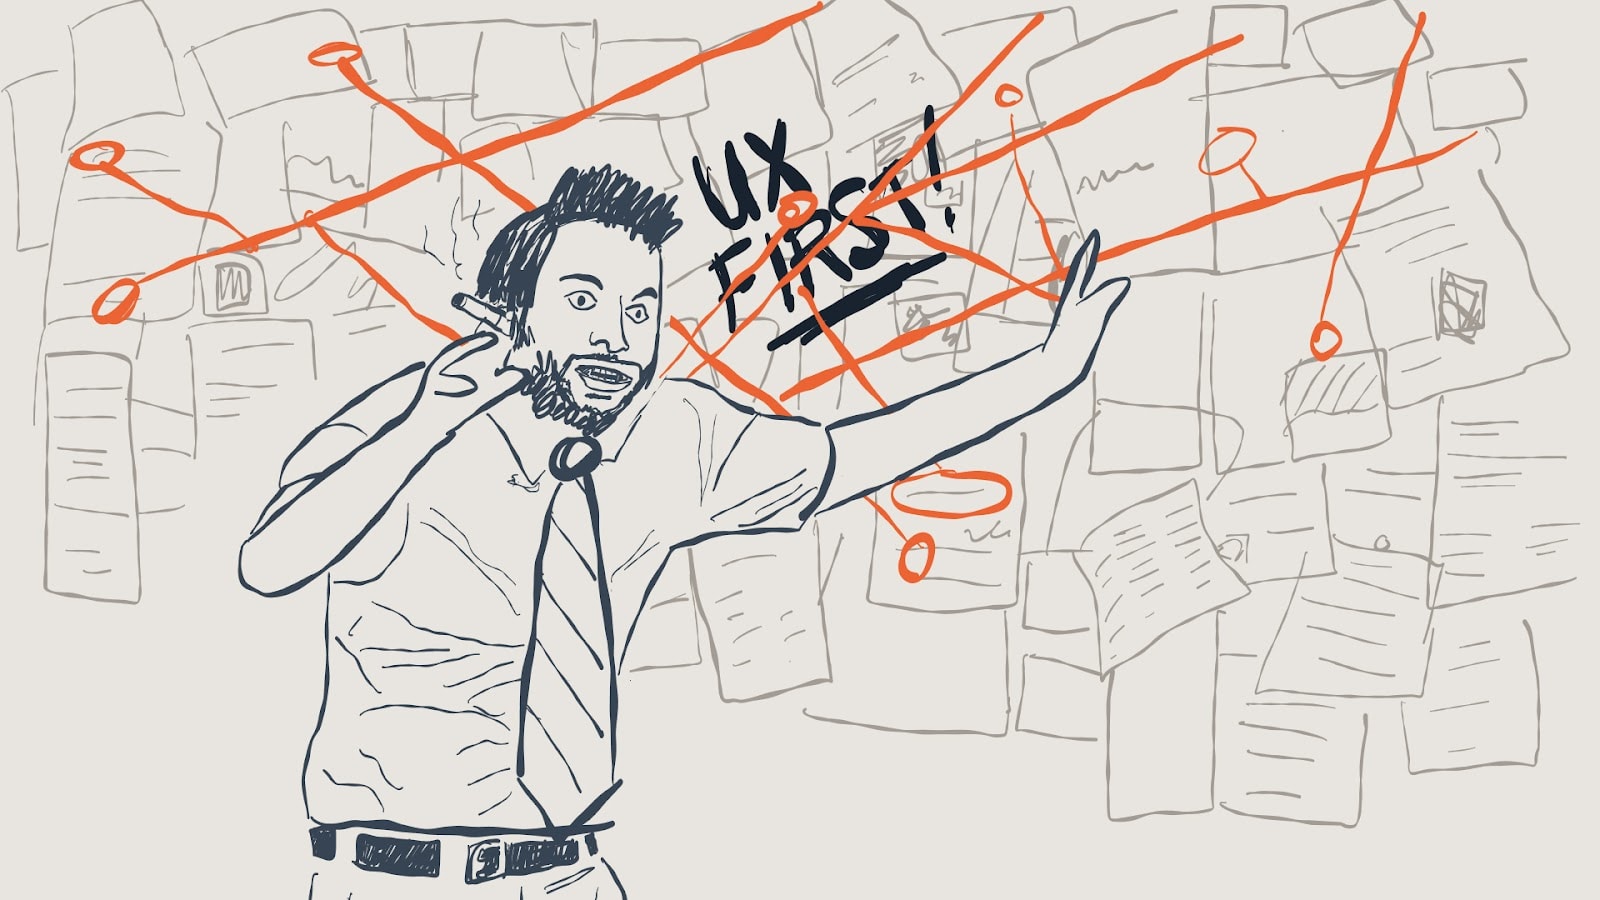 The image is a custom illustration of the Pepe Silvia meme from It's Always Sunny in Philadelphia where the character Charlie Kelly, very stressed, stands in front of a wall of messy papers with red string connecting points. Where the meme says 'Pepe Silvia' the illustration says 'UX First'.